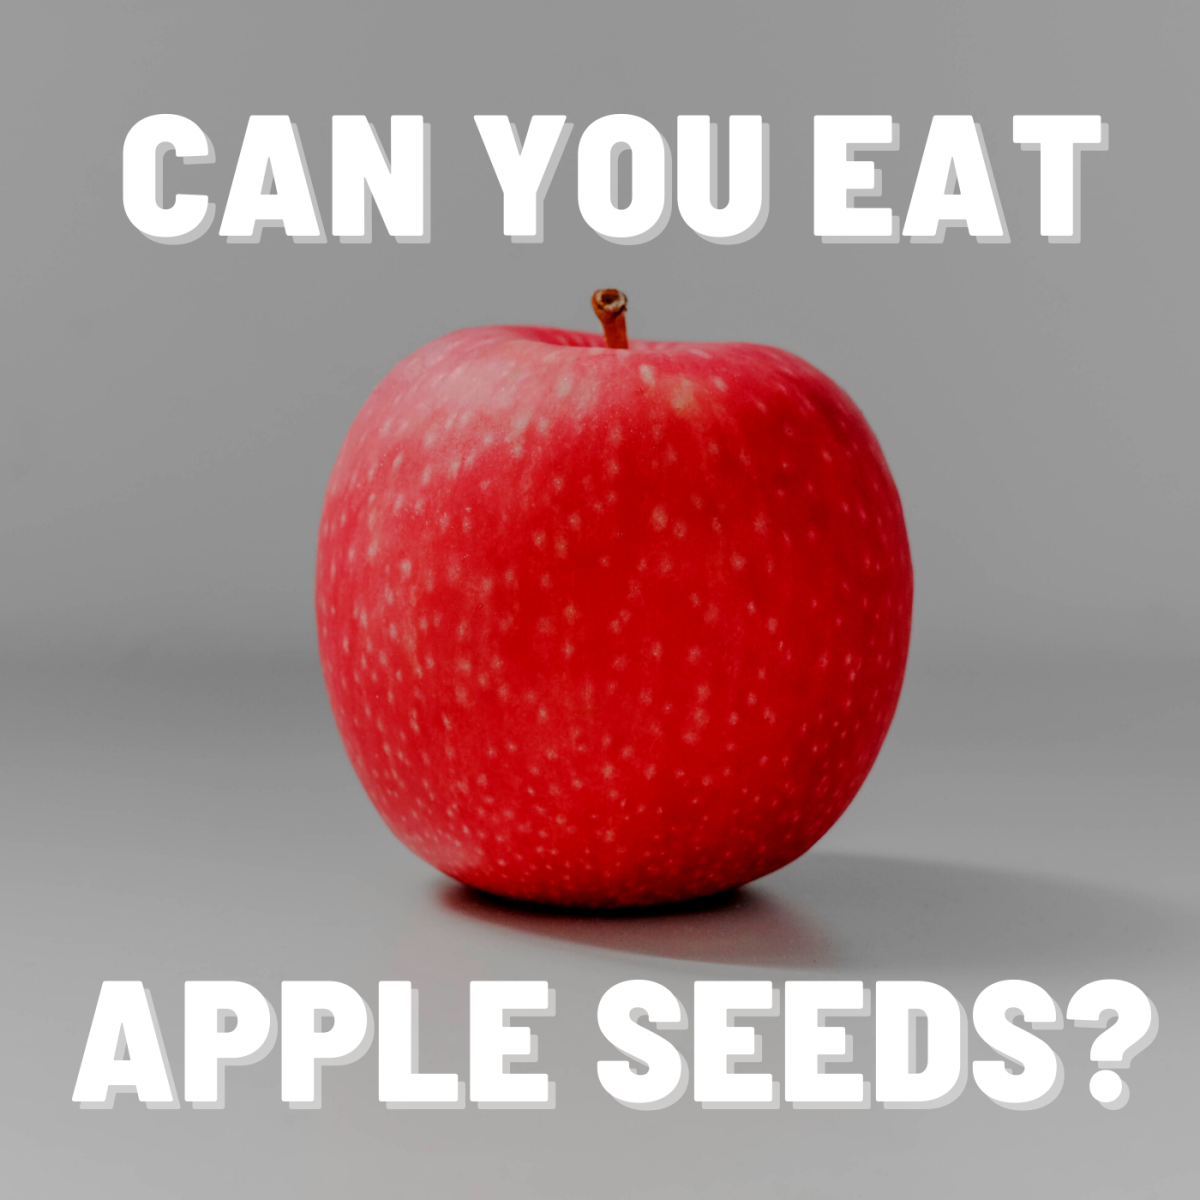 Are Apple Seeds Poisonous? Facts About Cyanide in Apples